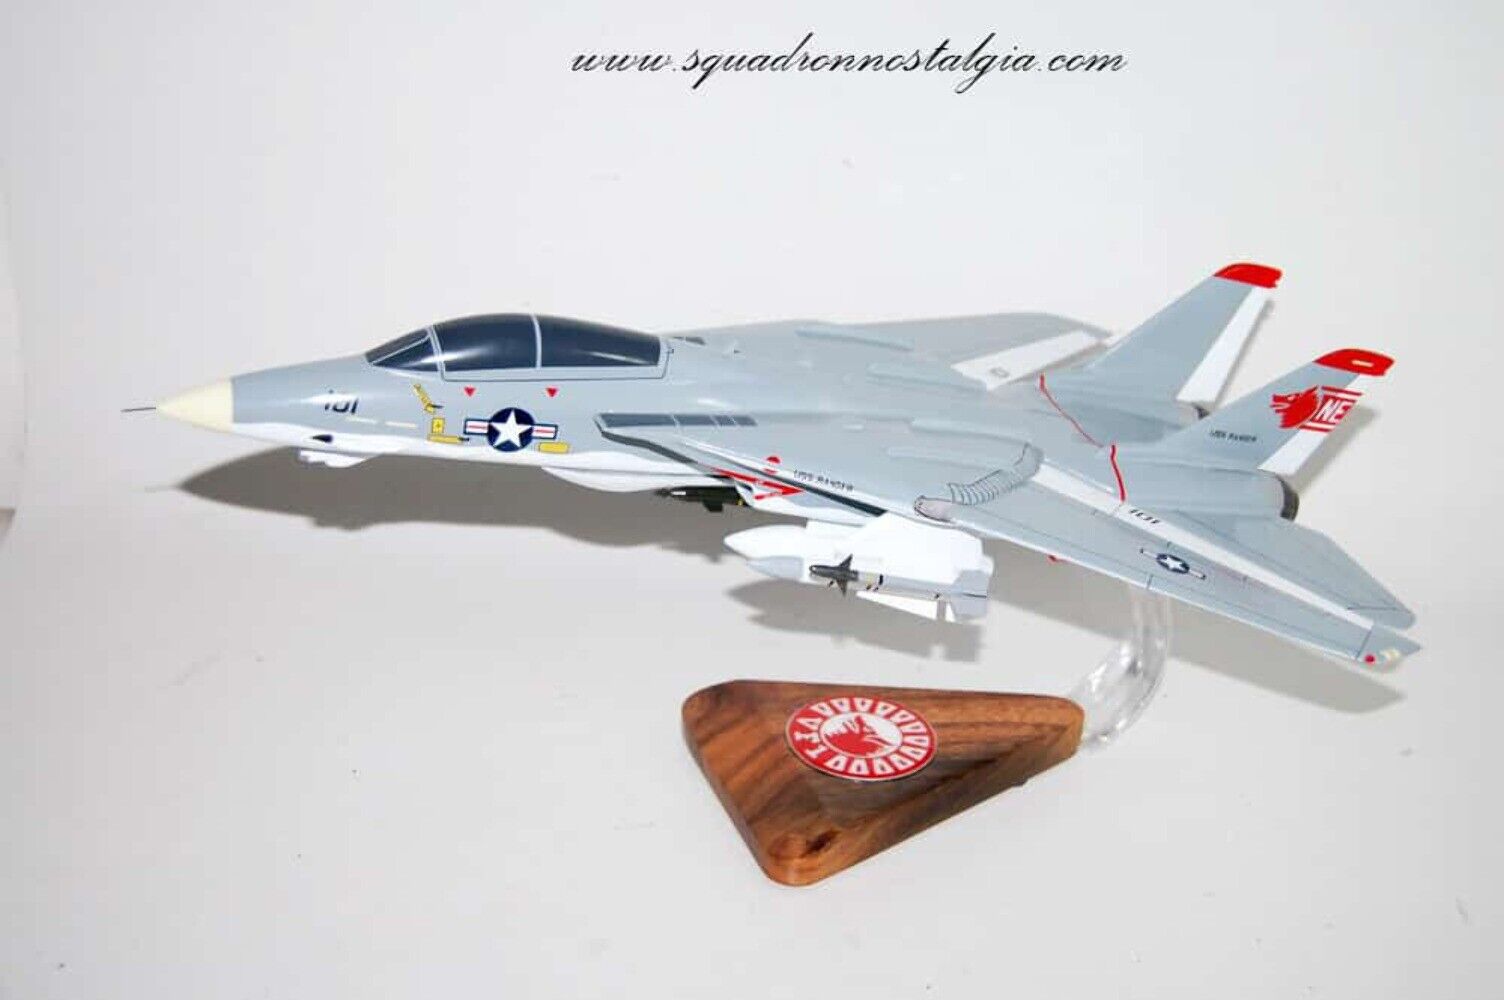 VF-1 Wolfpack F-14a (1980) model, 1/42 (18